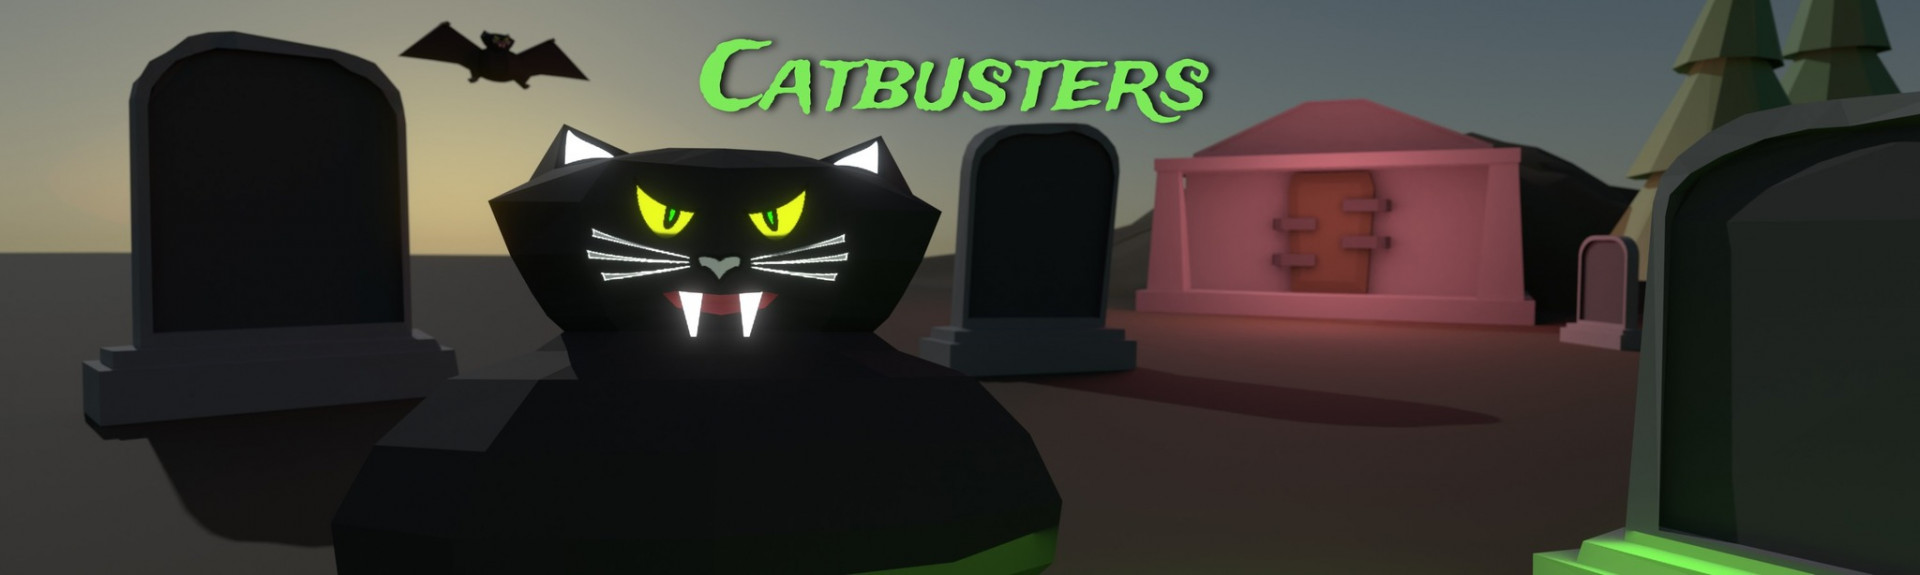 Catbusters